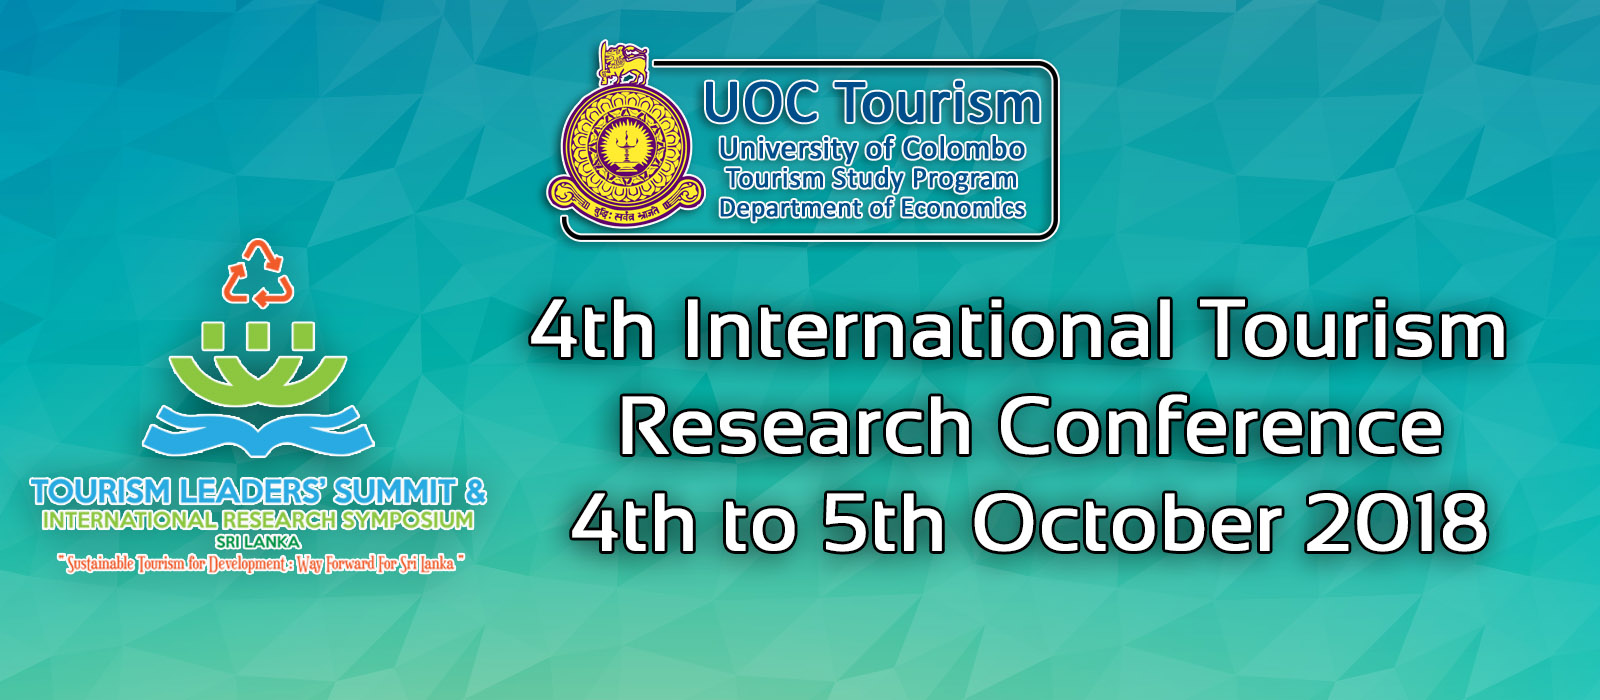 Tourism Leaders’ Summit (TLS) and International Tourism Research Conference (ITRC) – 4th & 5th Oct.